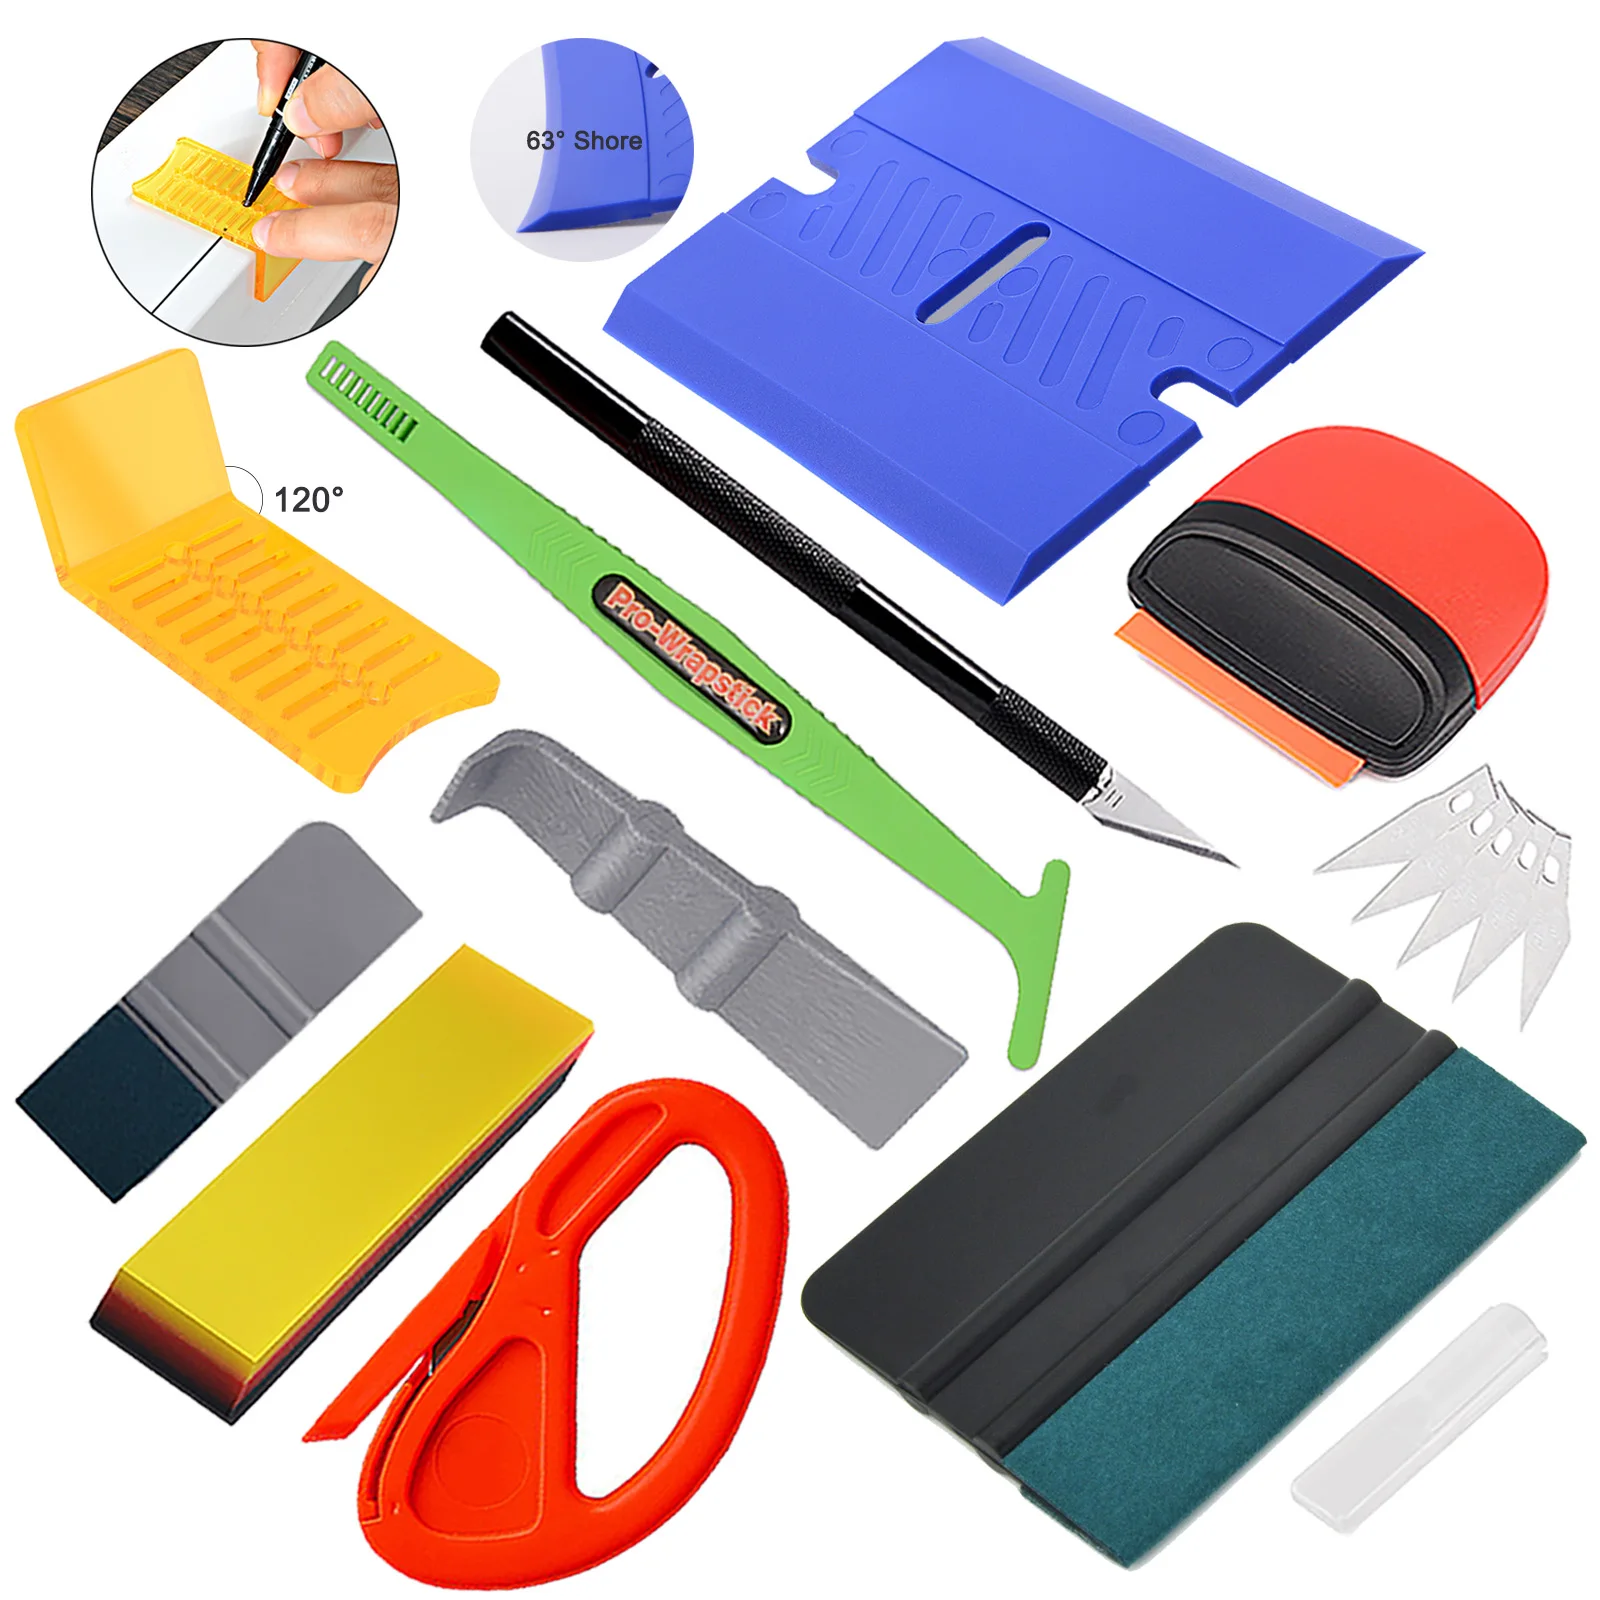 Car Vinyl Wrappig Micro Squeegee Tuck Tools Gasket Window Tint Glass Stickers UK 